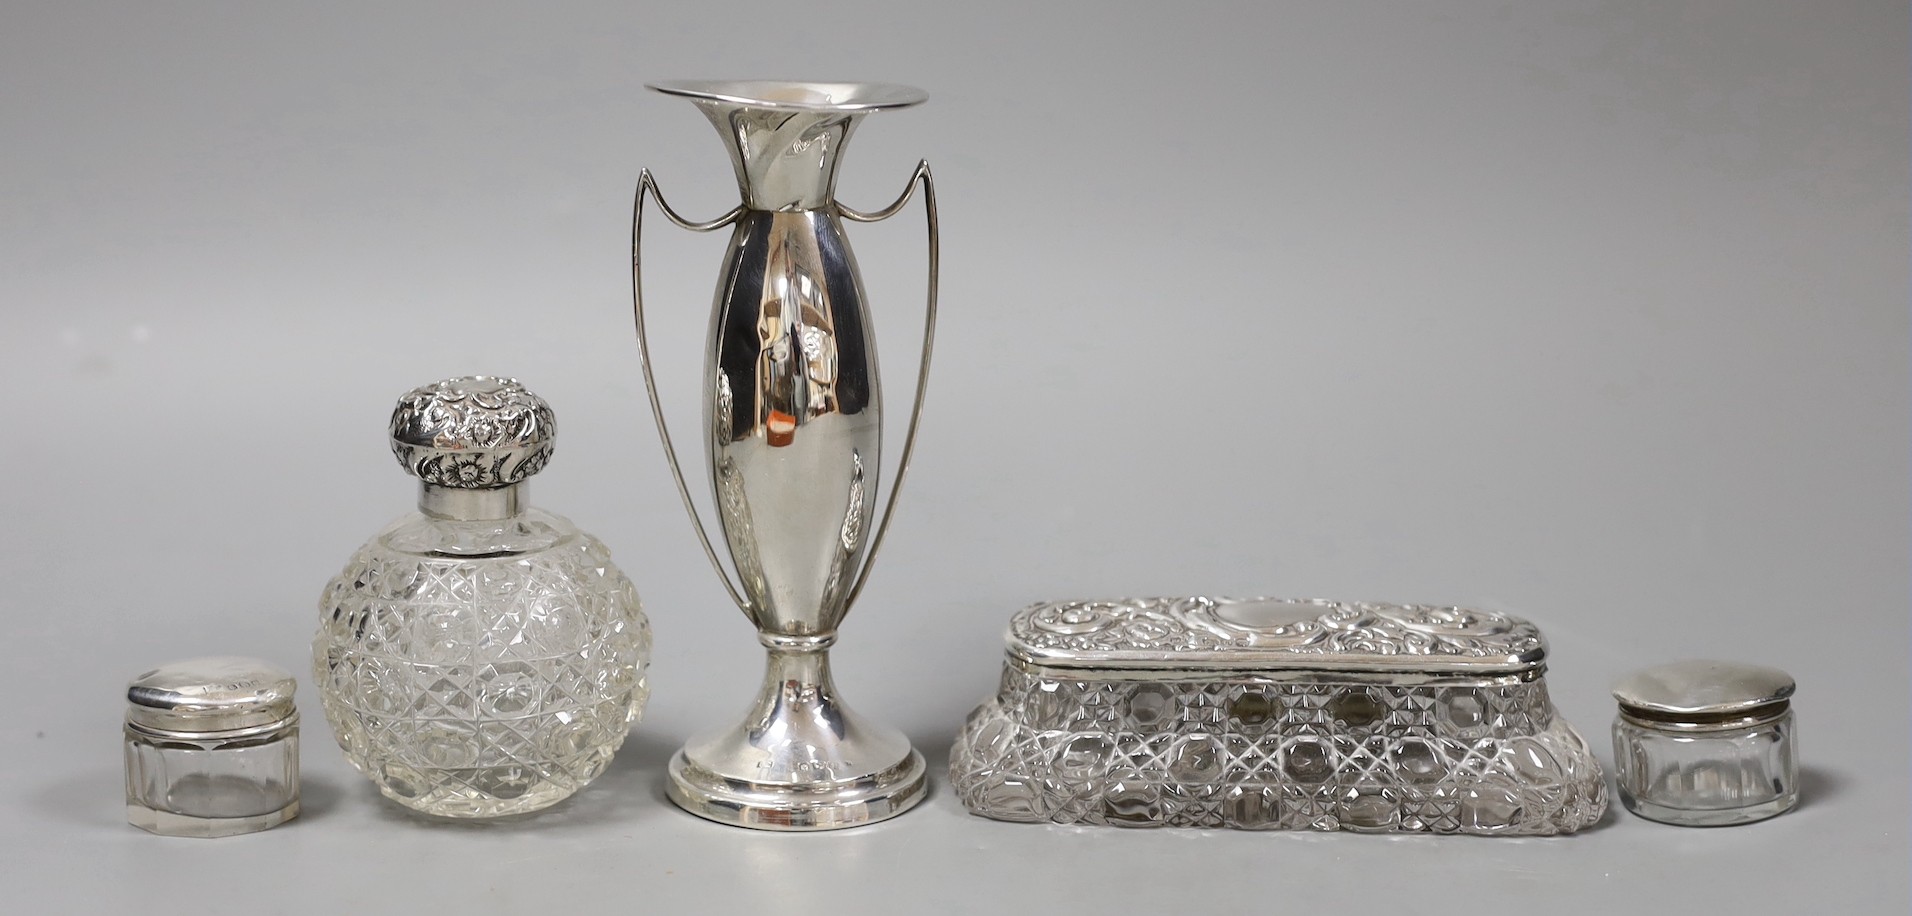 An Edwardian silver two handled posy vase, 13.7cm, a silver mounted glass scent bottle and three similar toilet jars.